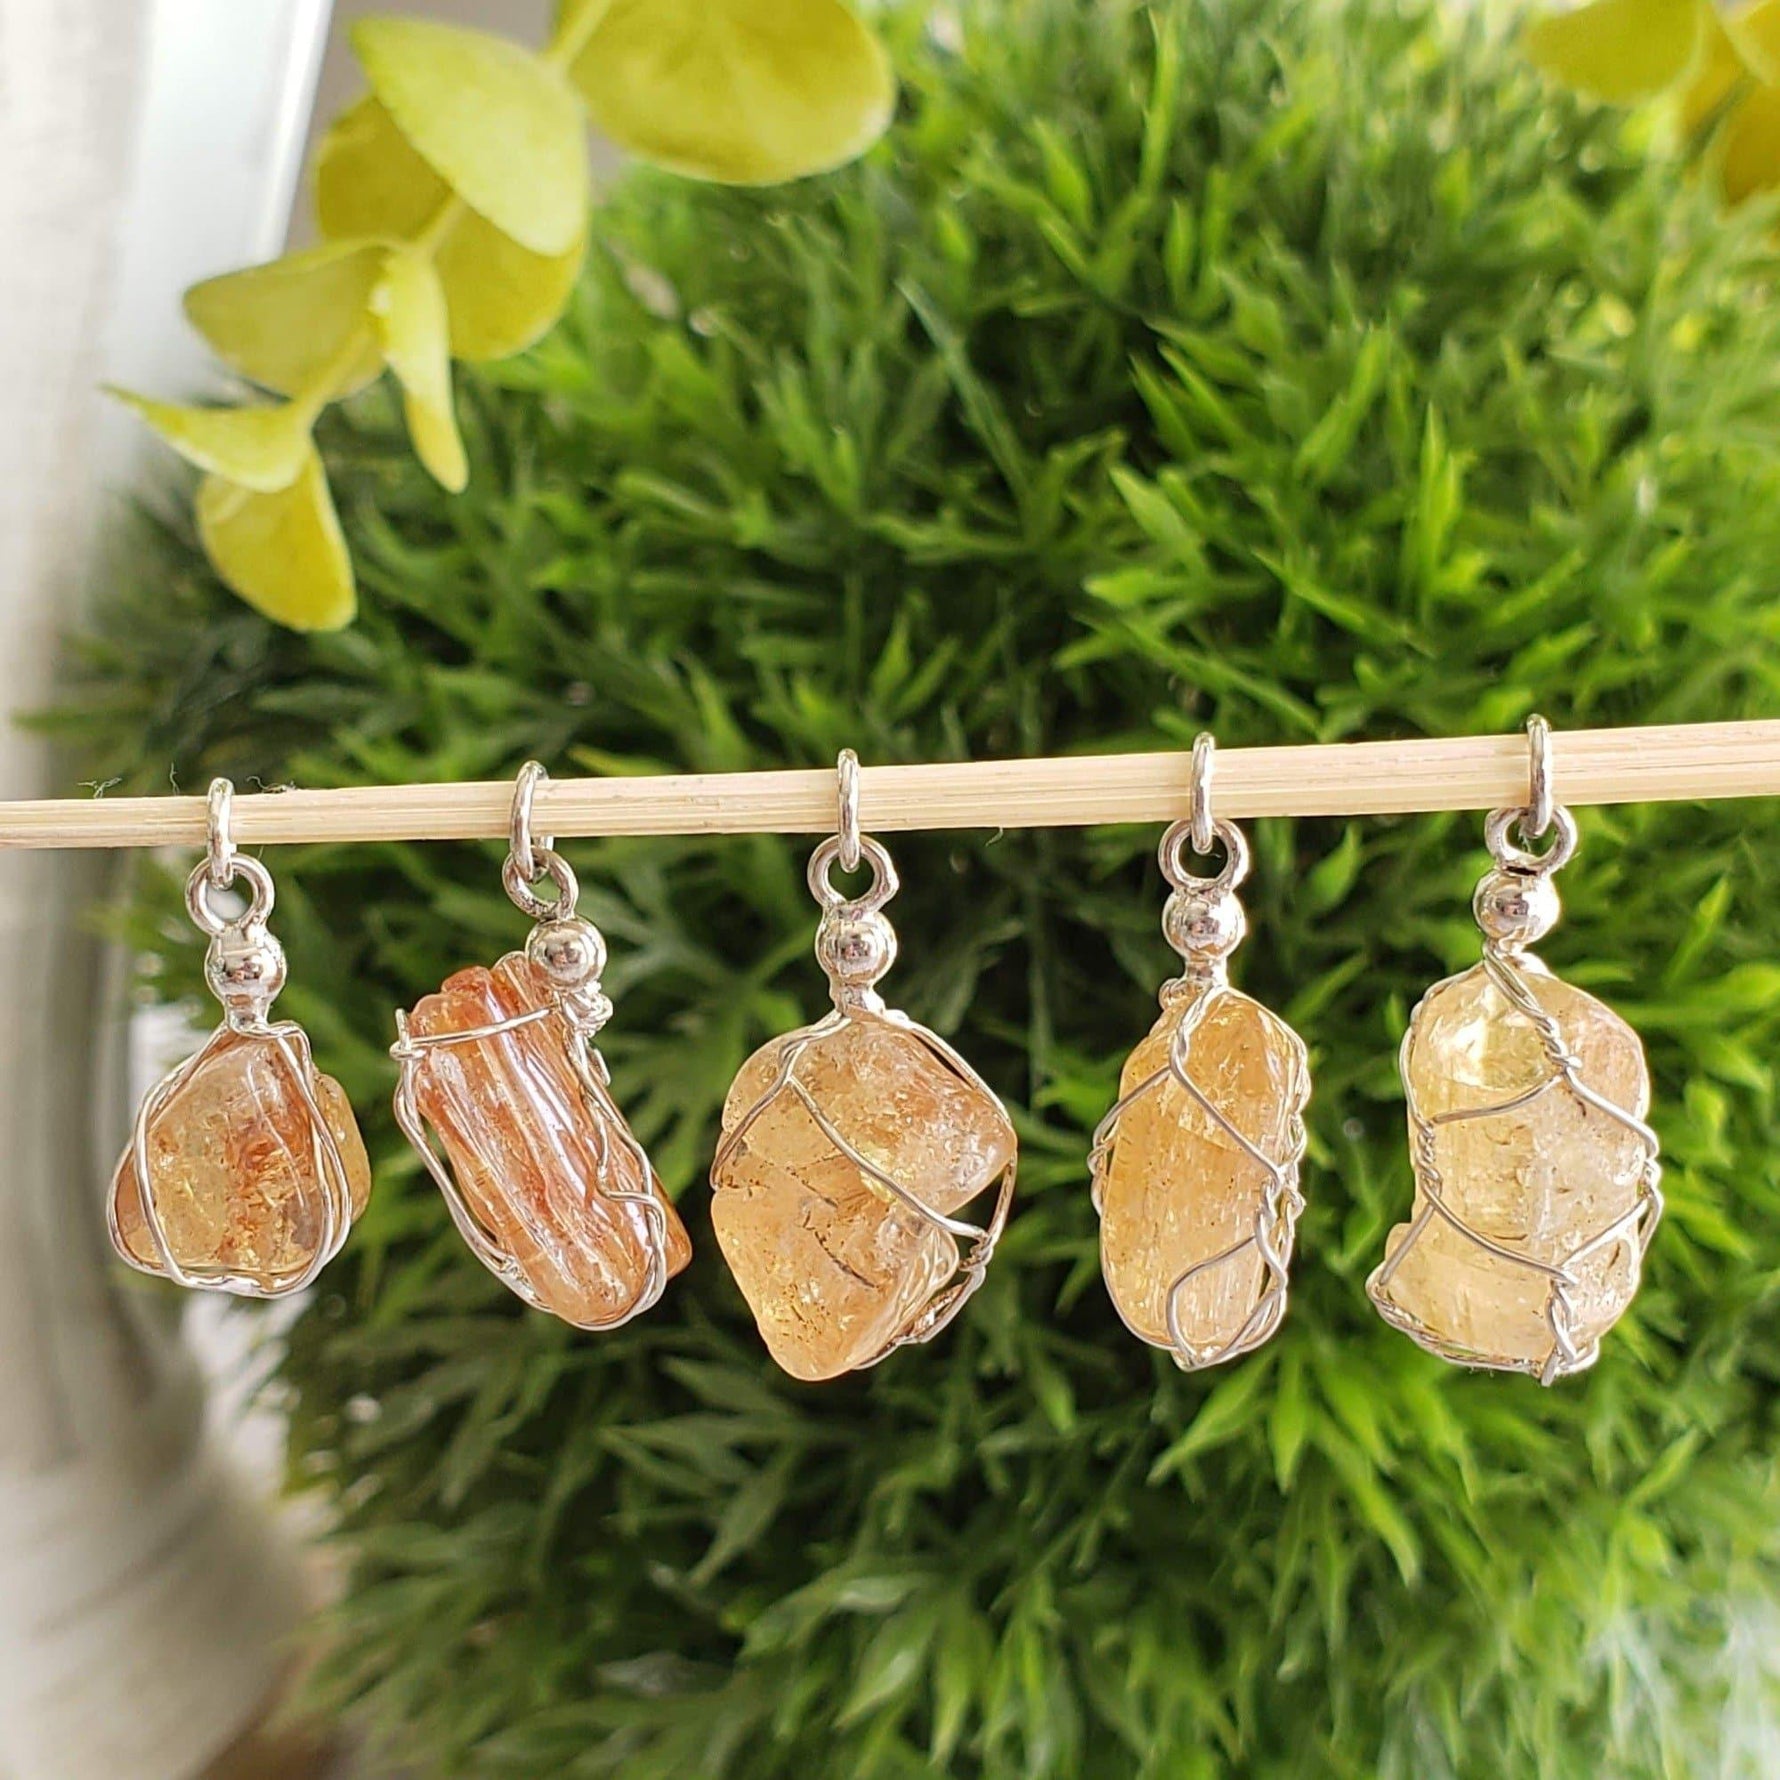 Imperial Topaz Pendant | 925 Silver Wire Wrapped Pendant | Natural Raw Topaz